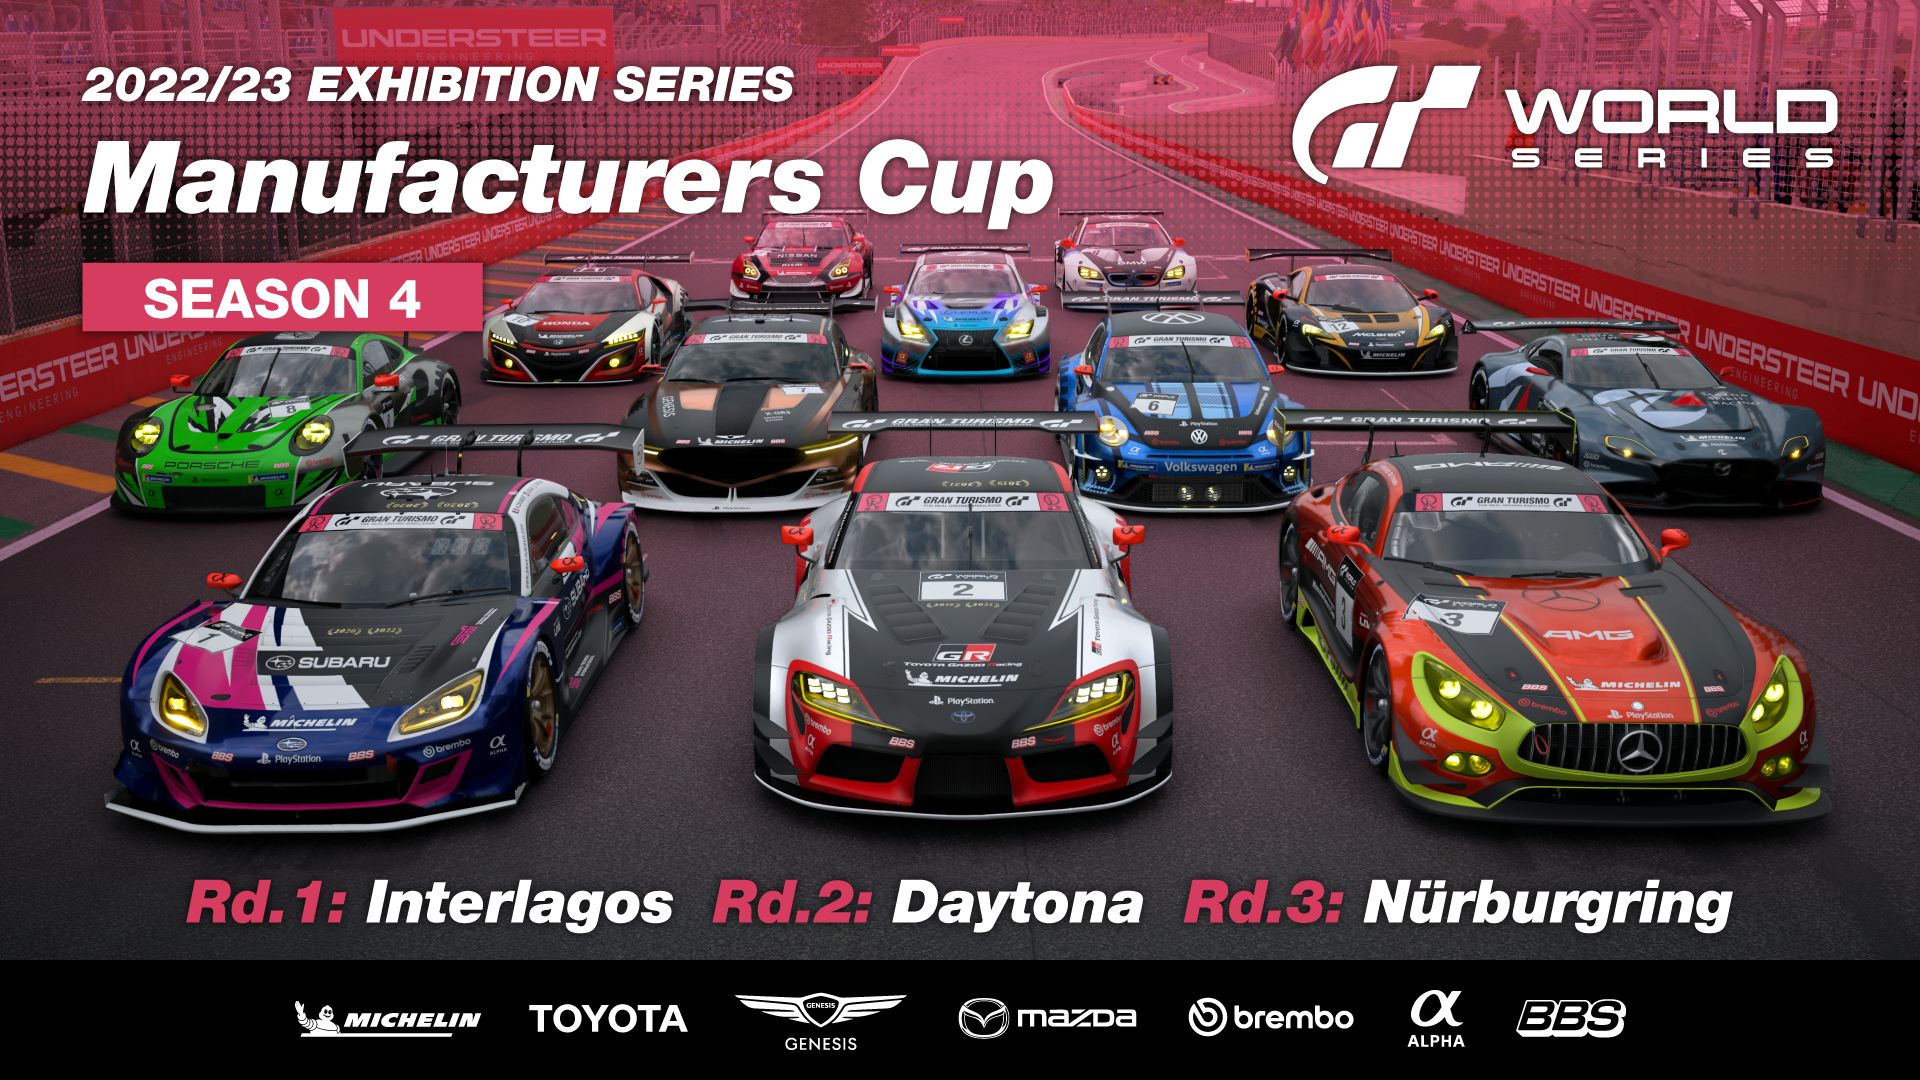 The "Gran Turismo World Series" Manufacturers Cup 2022/2023 Exhibition